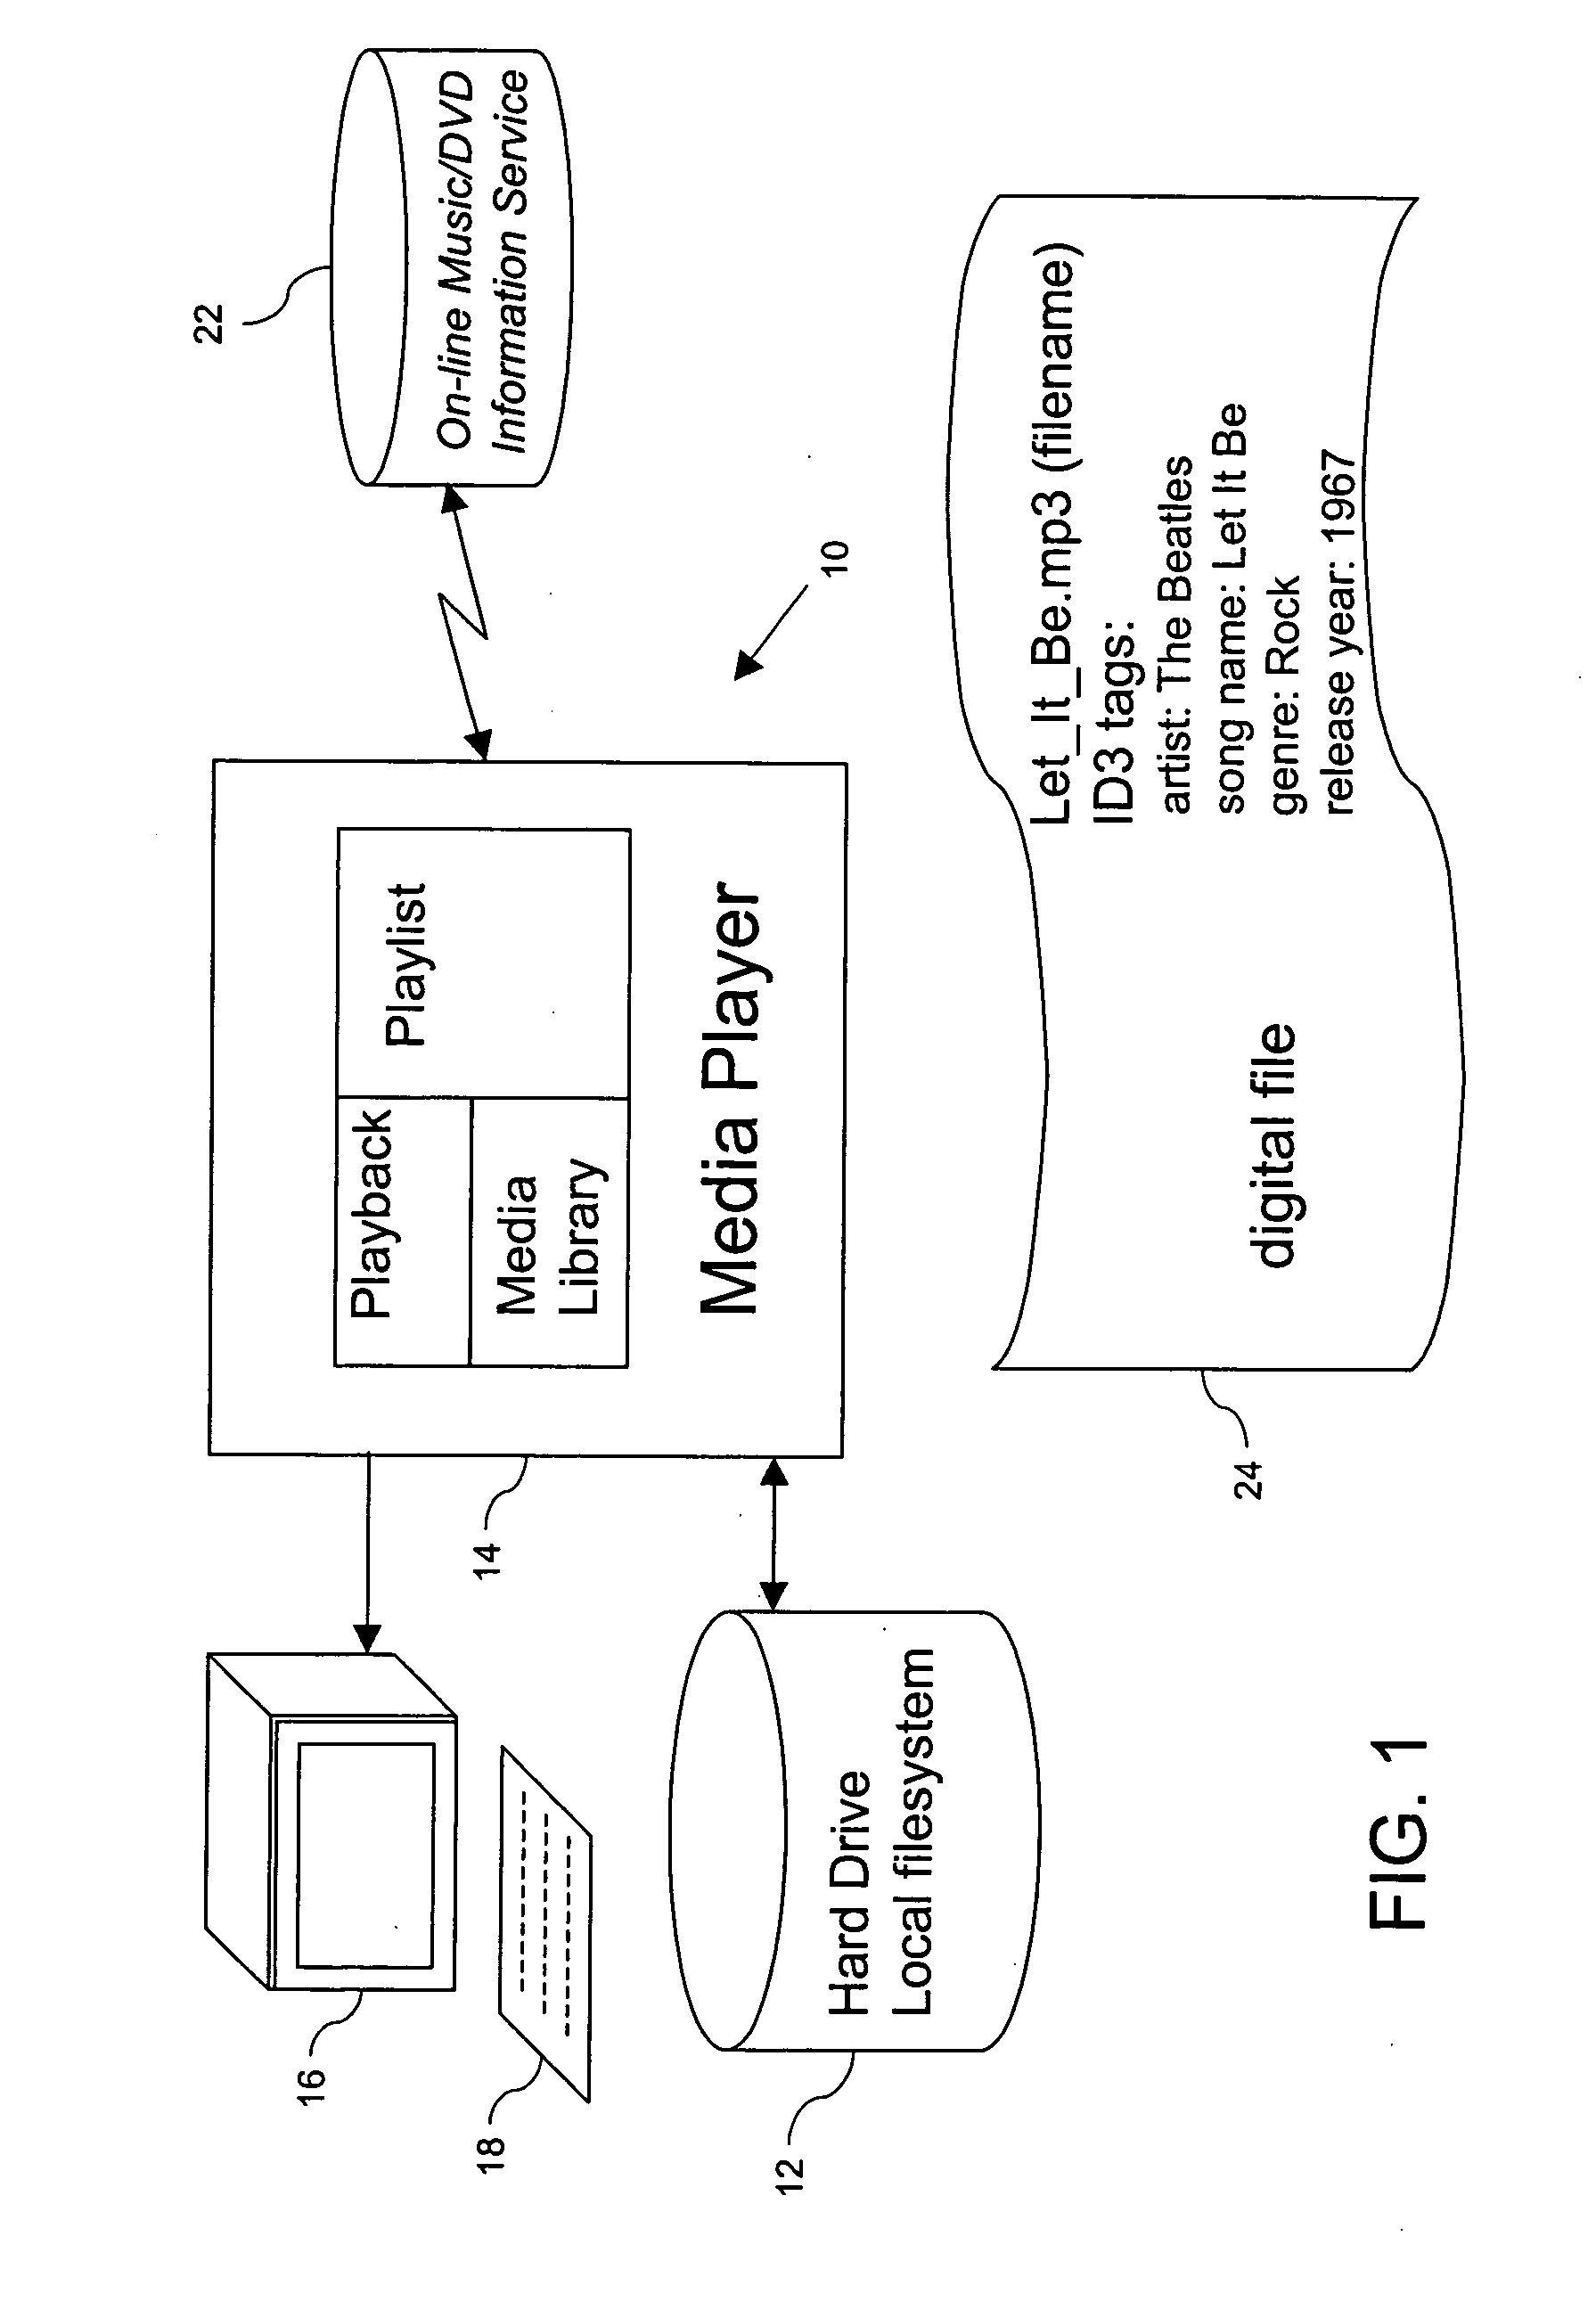 Network-based data collection, including local data attributes, enabling media management without requiring a network connection